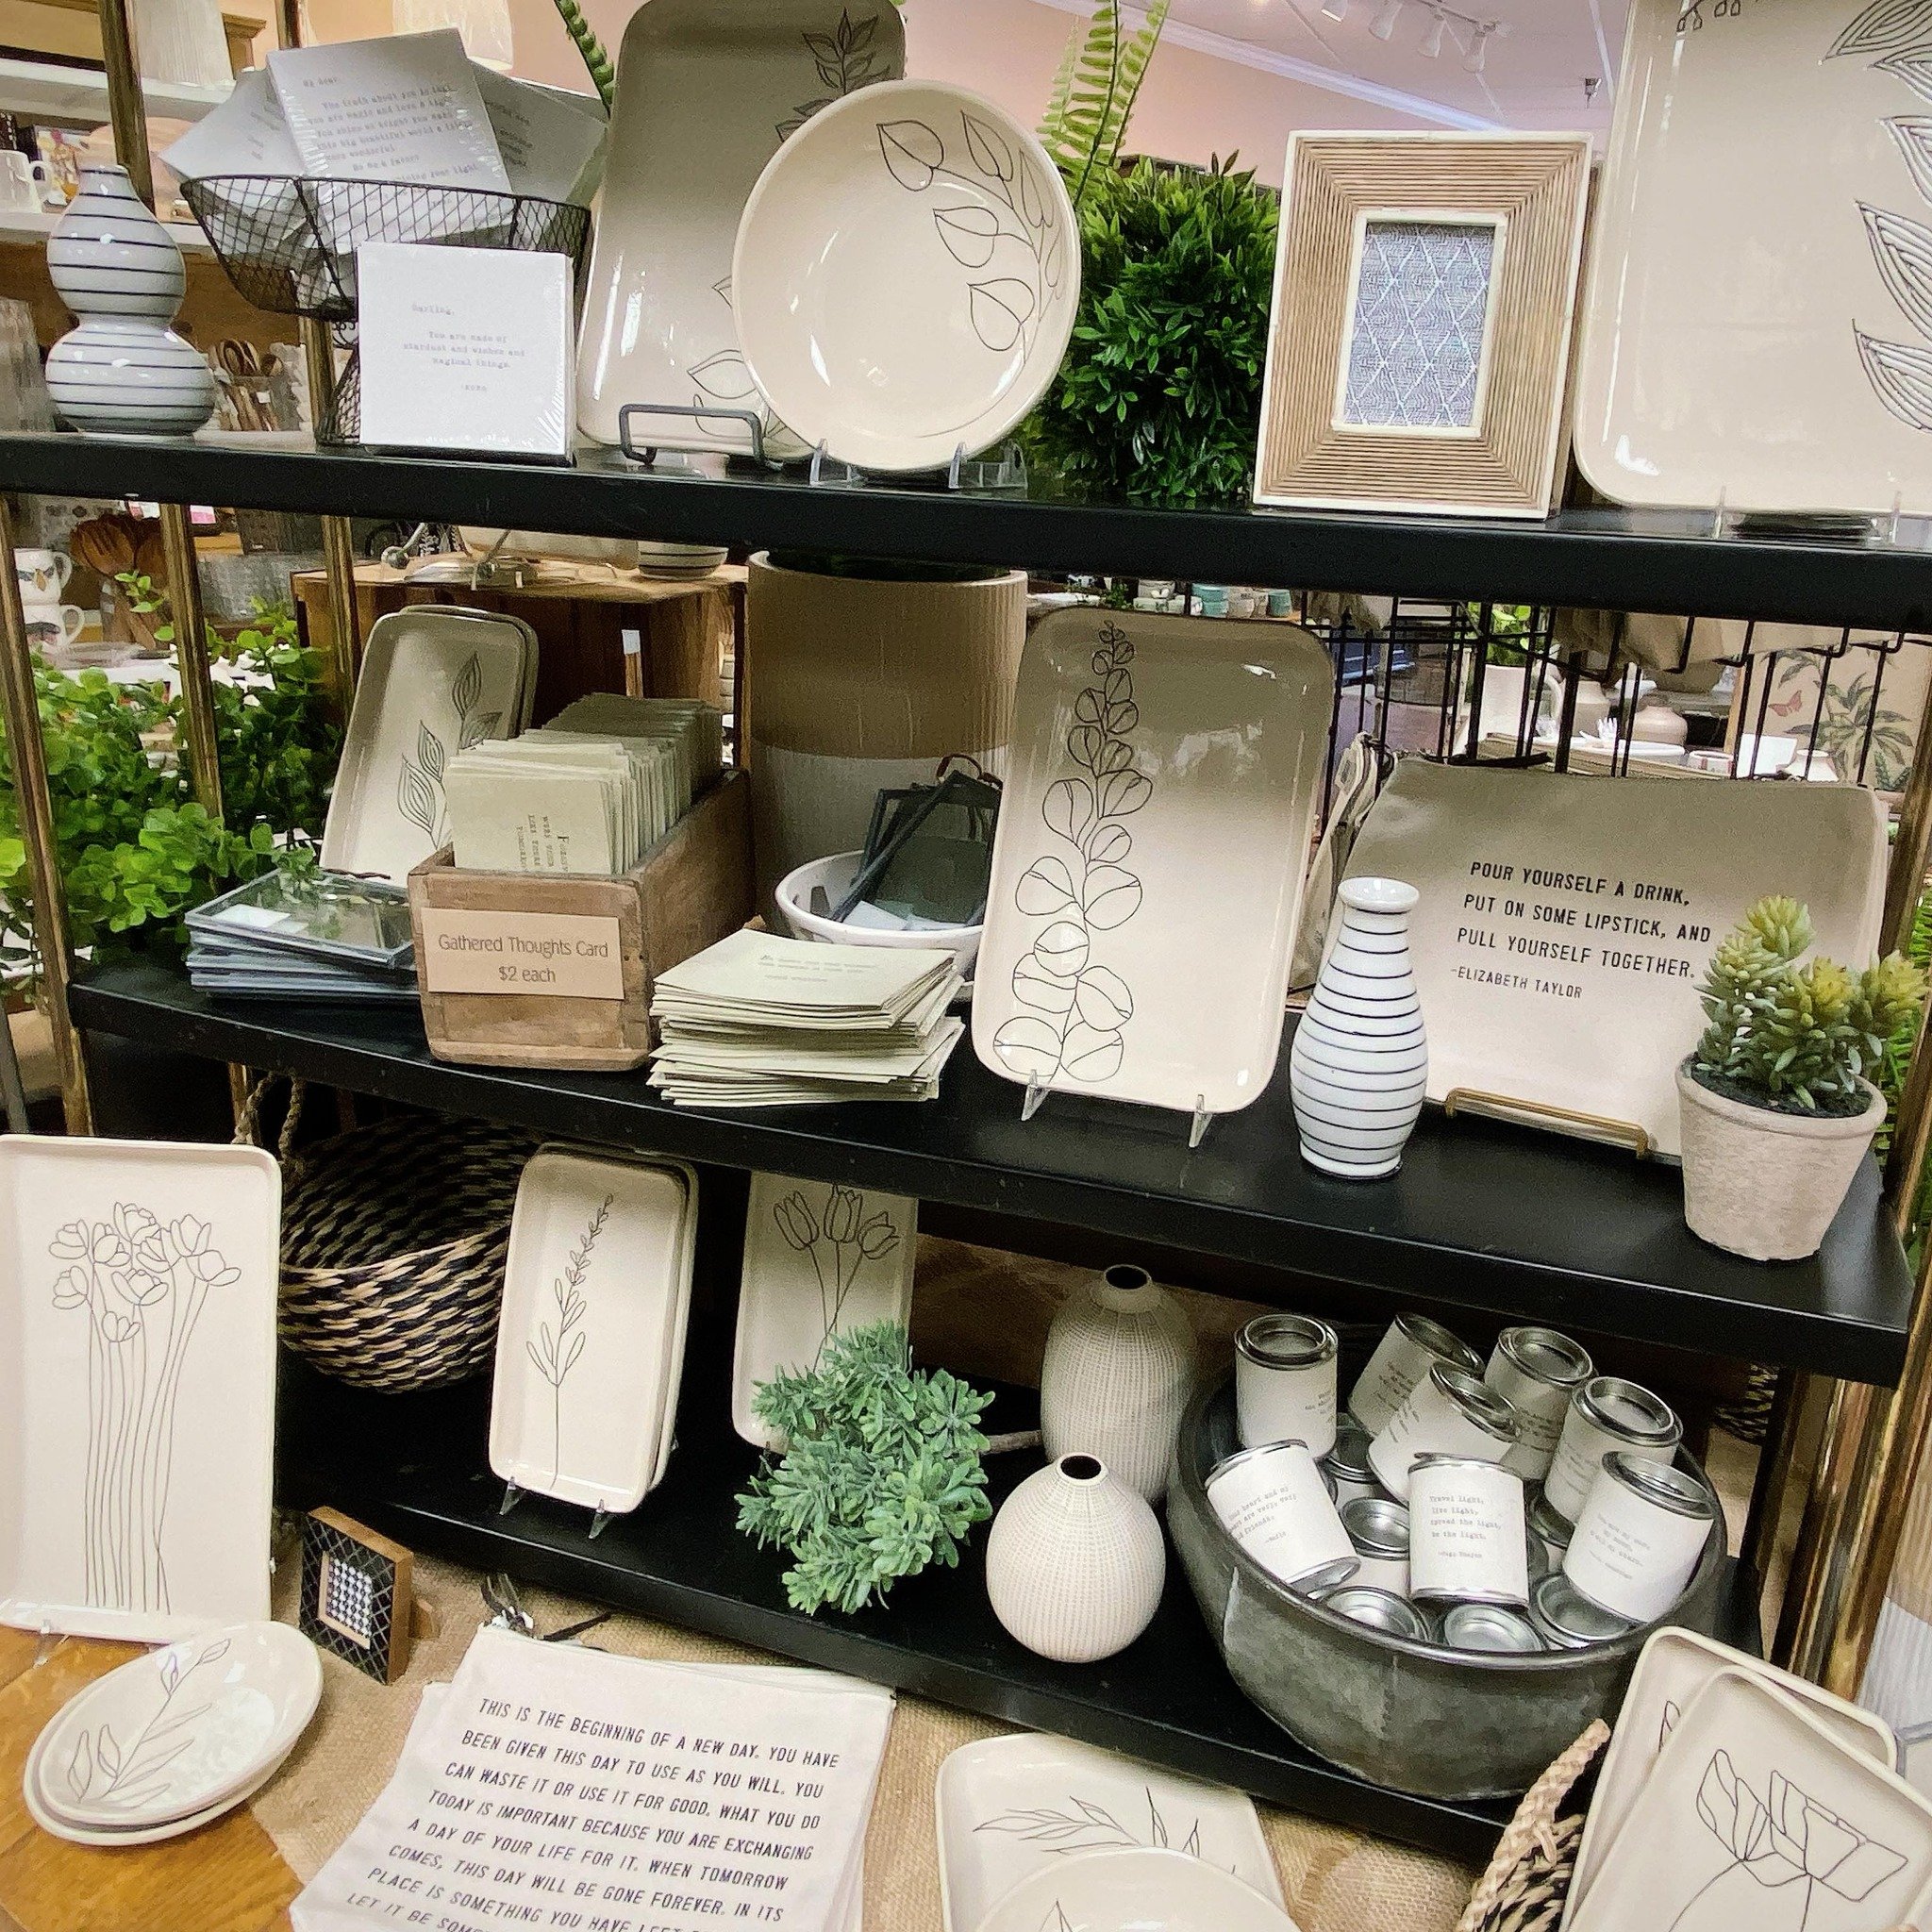 Beautiful ceramics hand made in Richmond! We carried this line a while ago and are thrilled to have it back in stock. Gorgeous botanical designs in a neutral palette - perfect for serving or as an addition to anyone&rsquo;s decor!